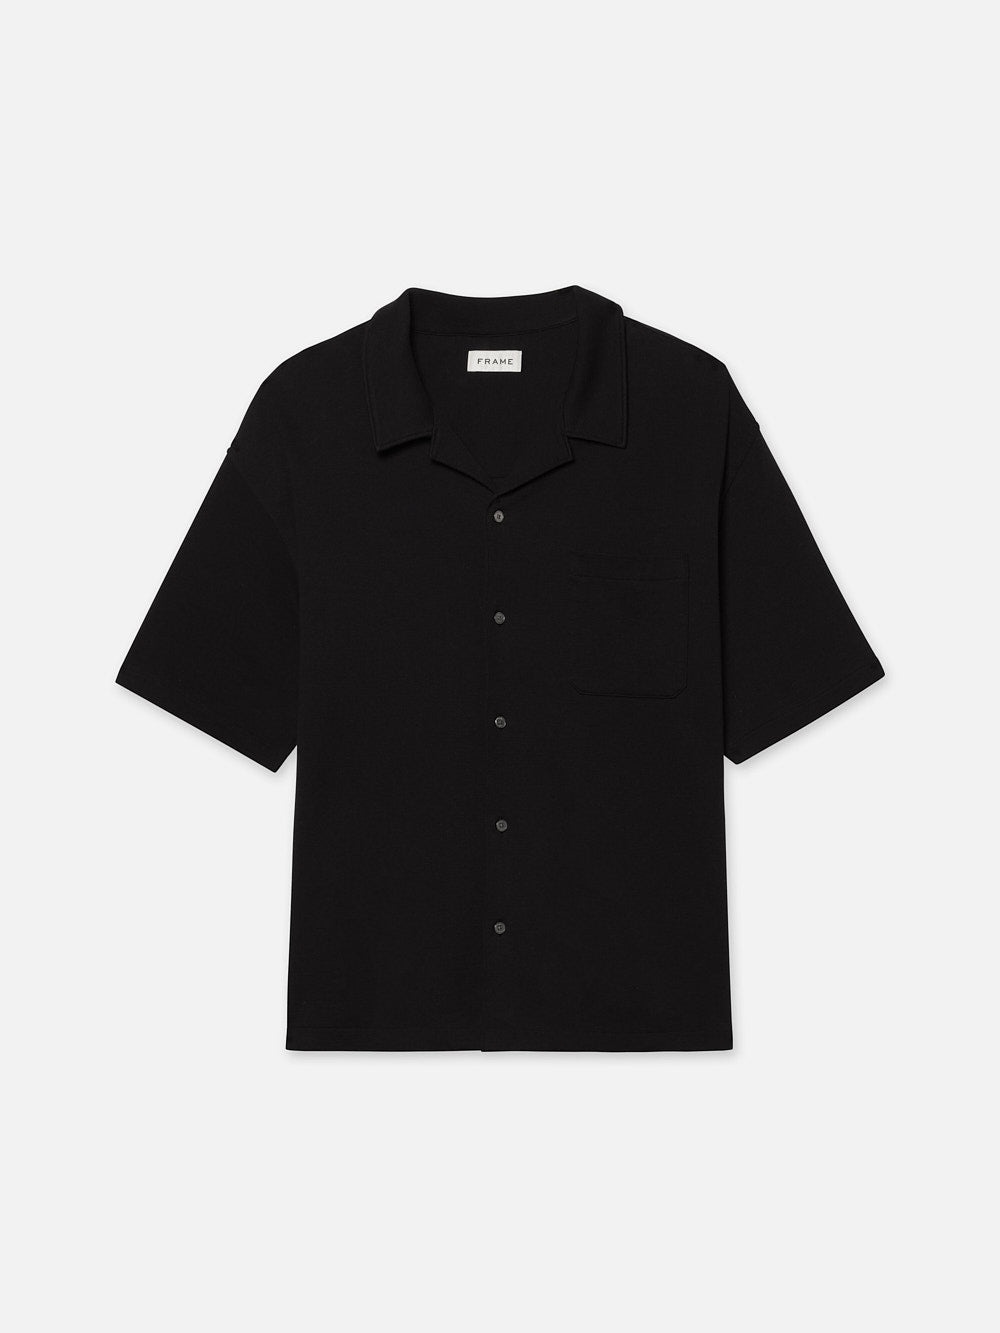 Duo Fold Relaxed Shirt in Black - 1